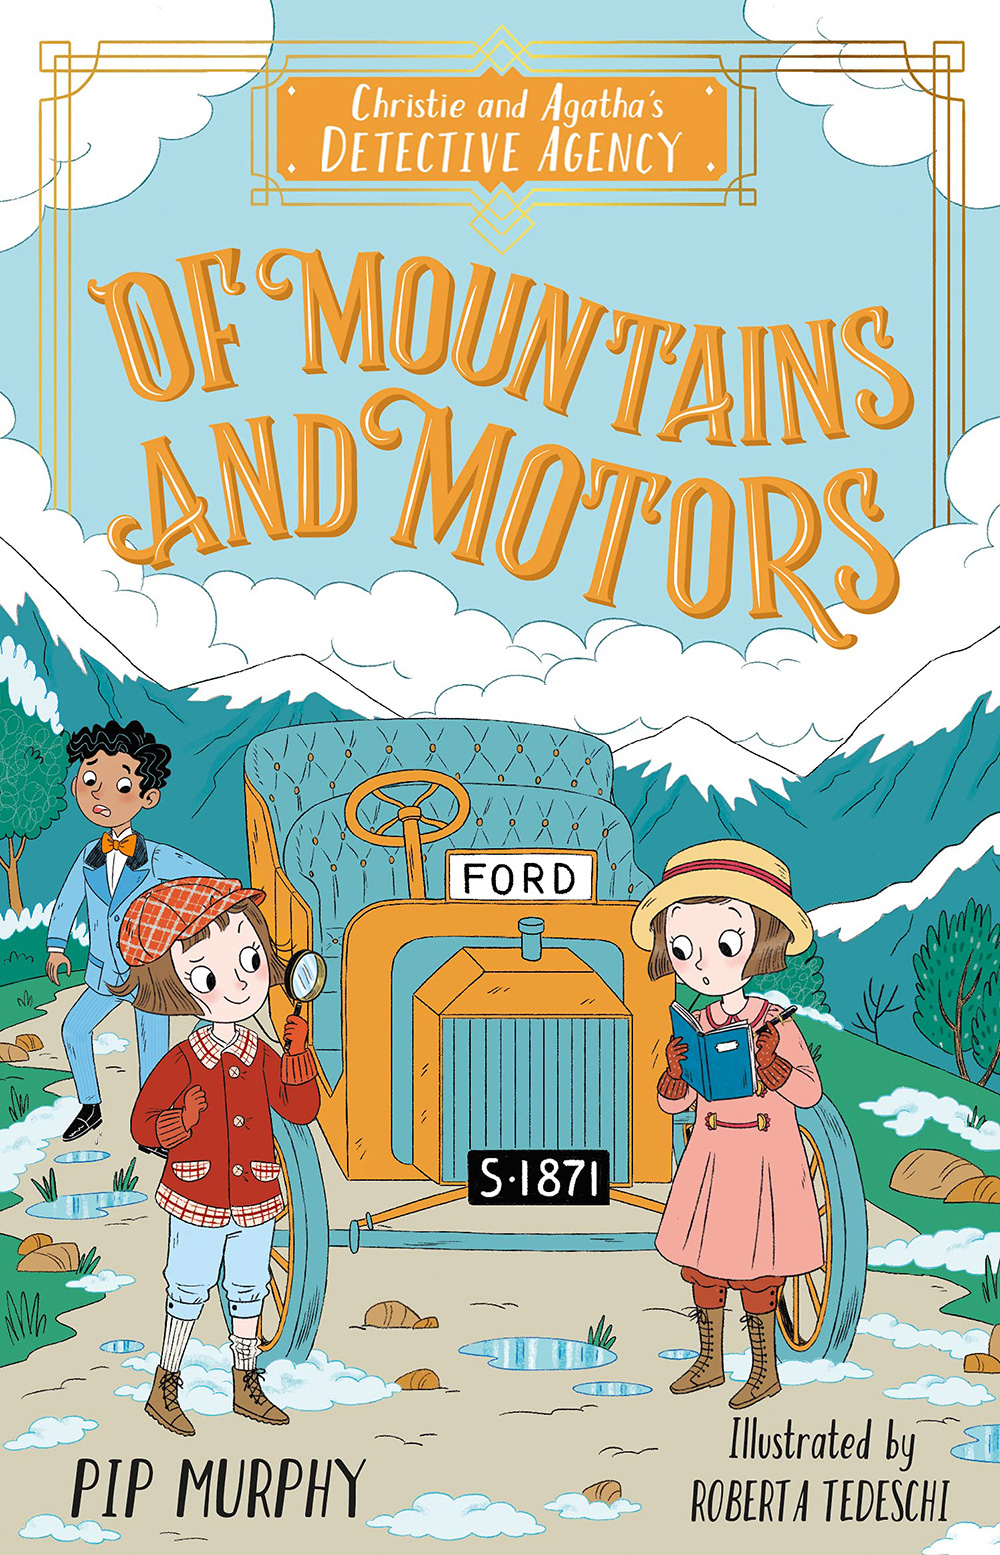 Book 2: Of Mountains and Motors